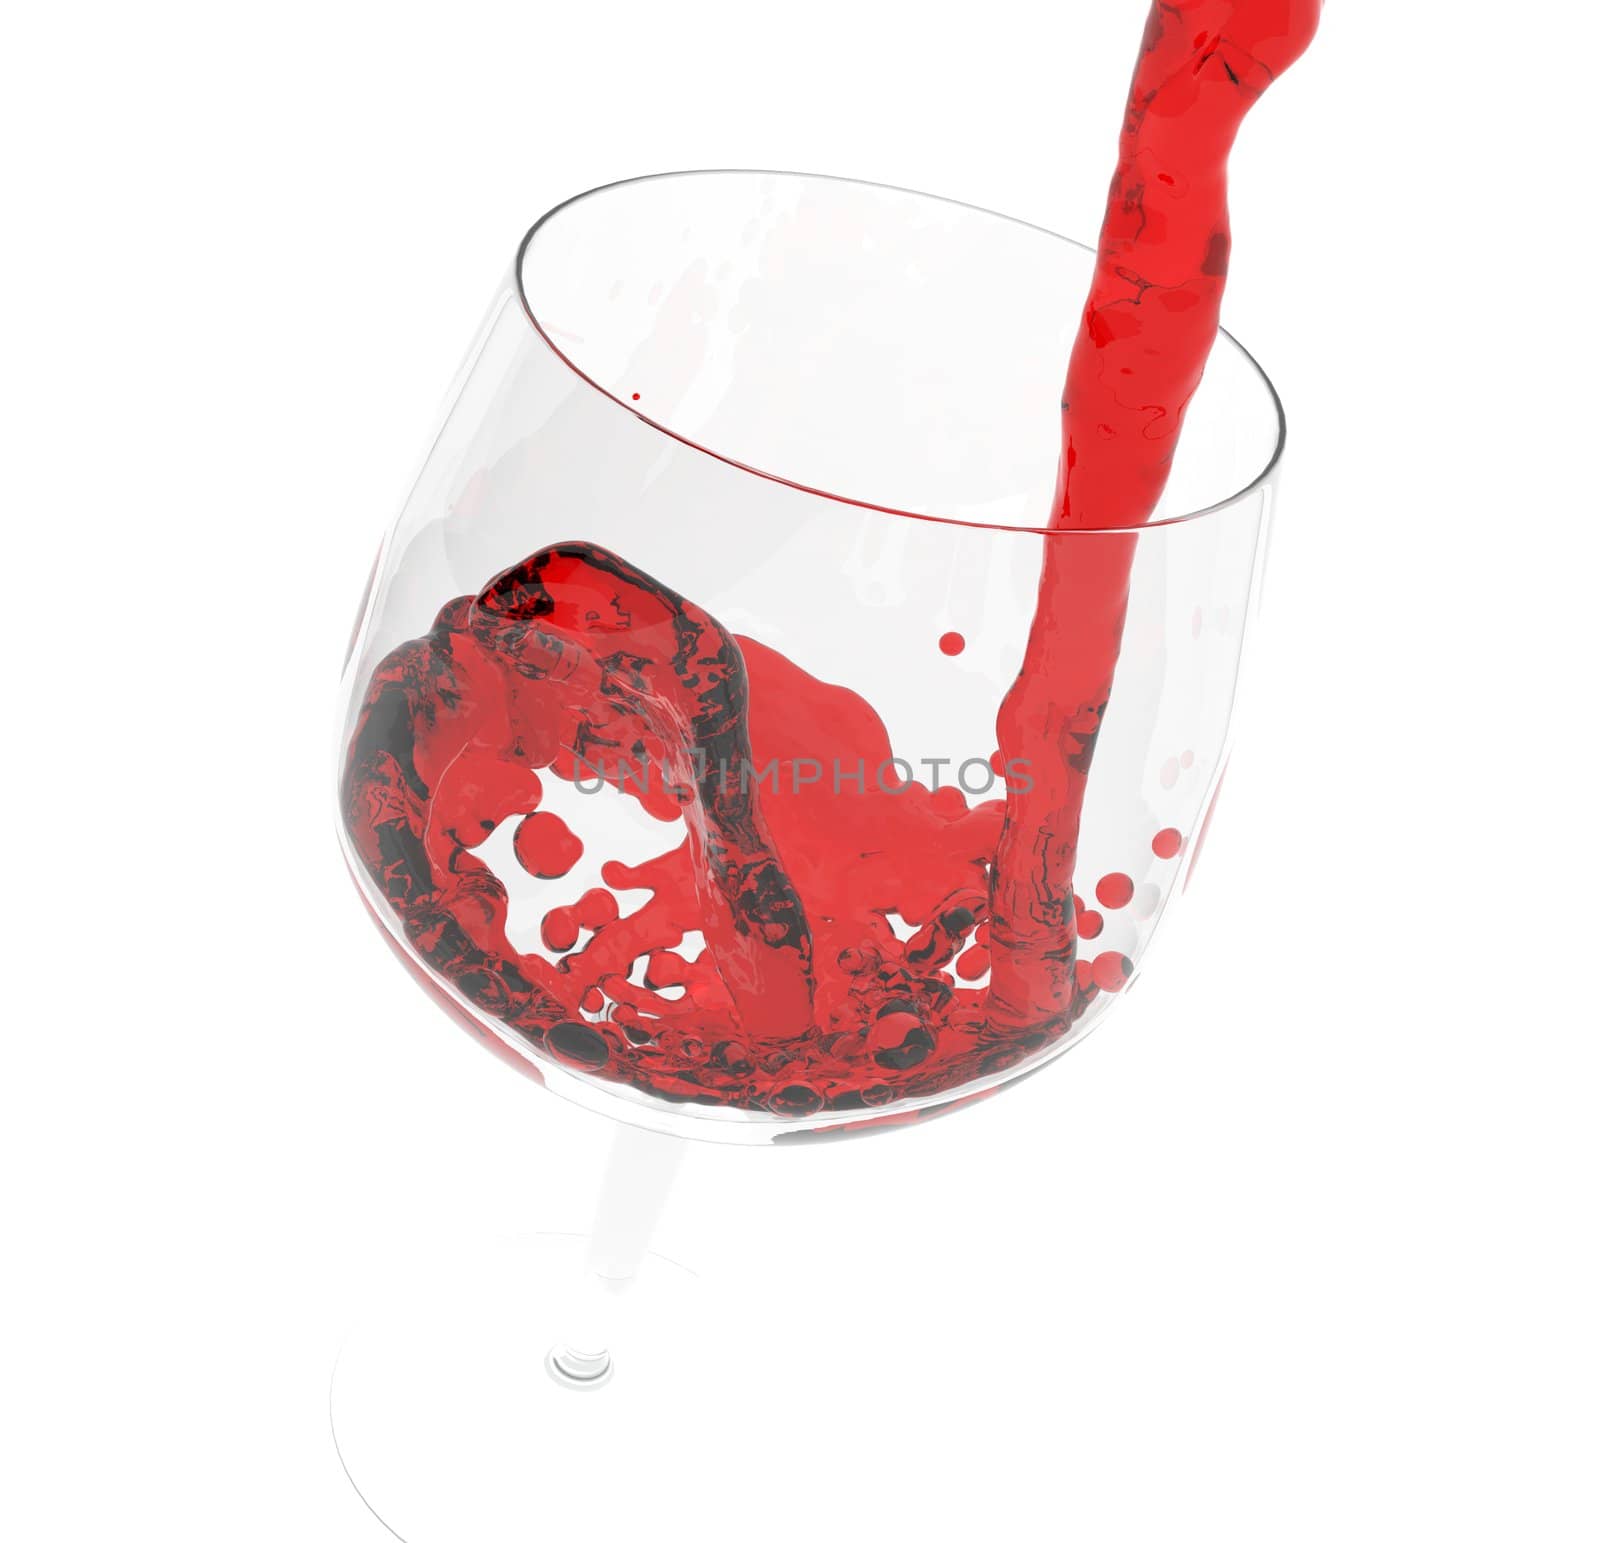 glass of red wine isolated on white